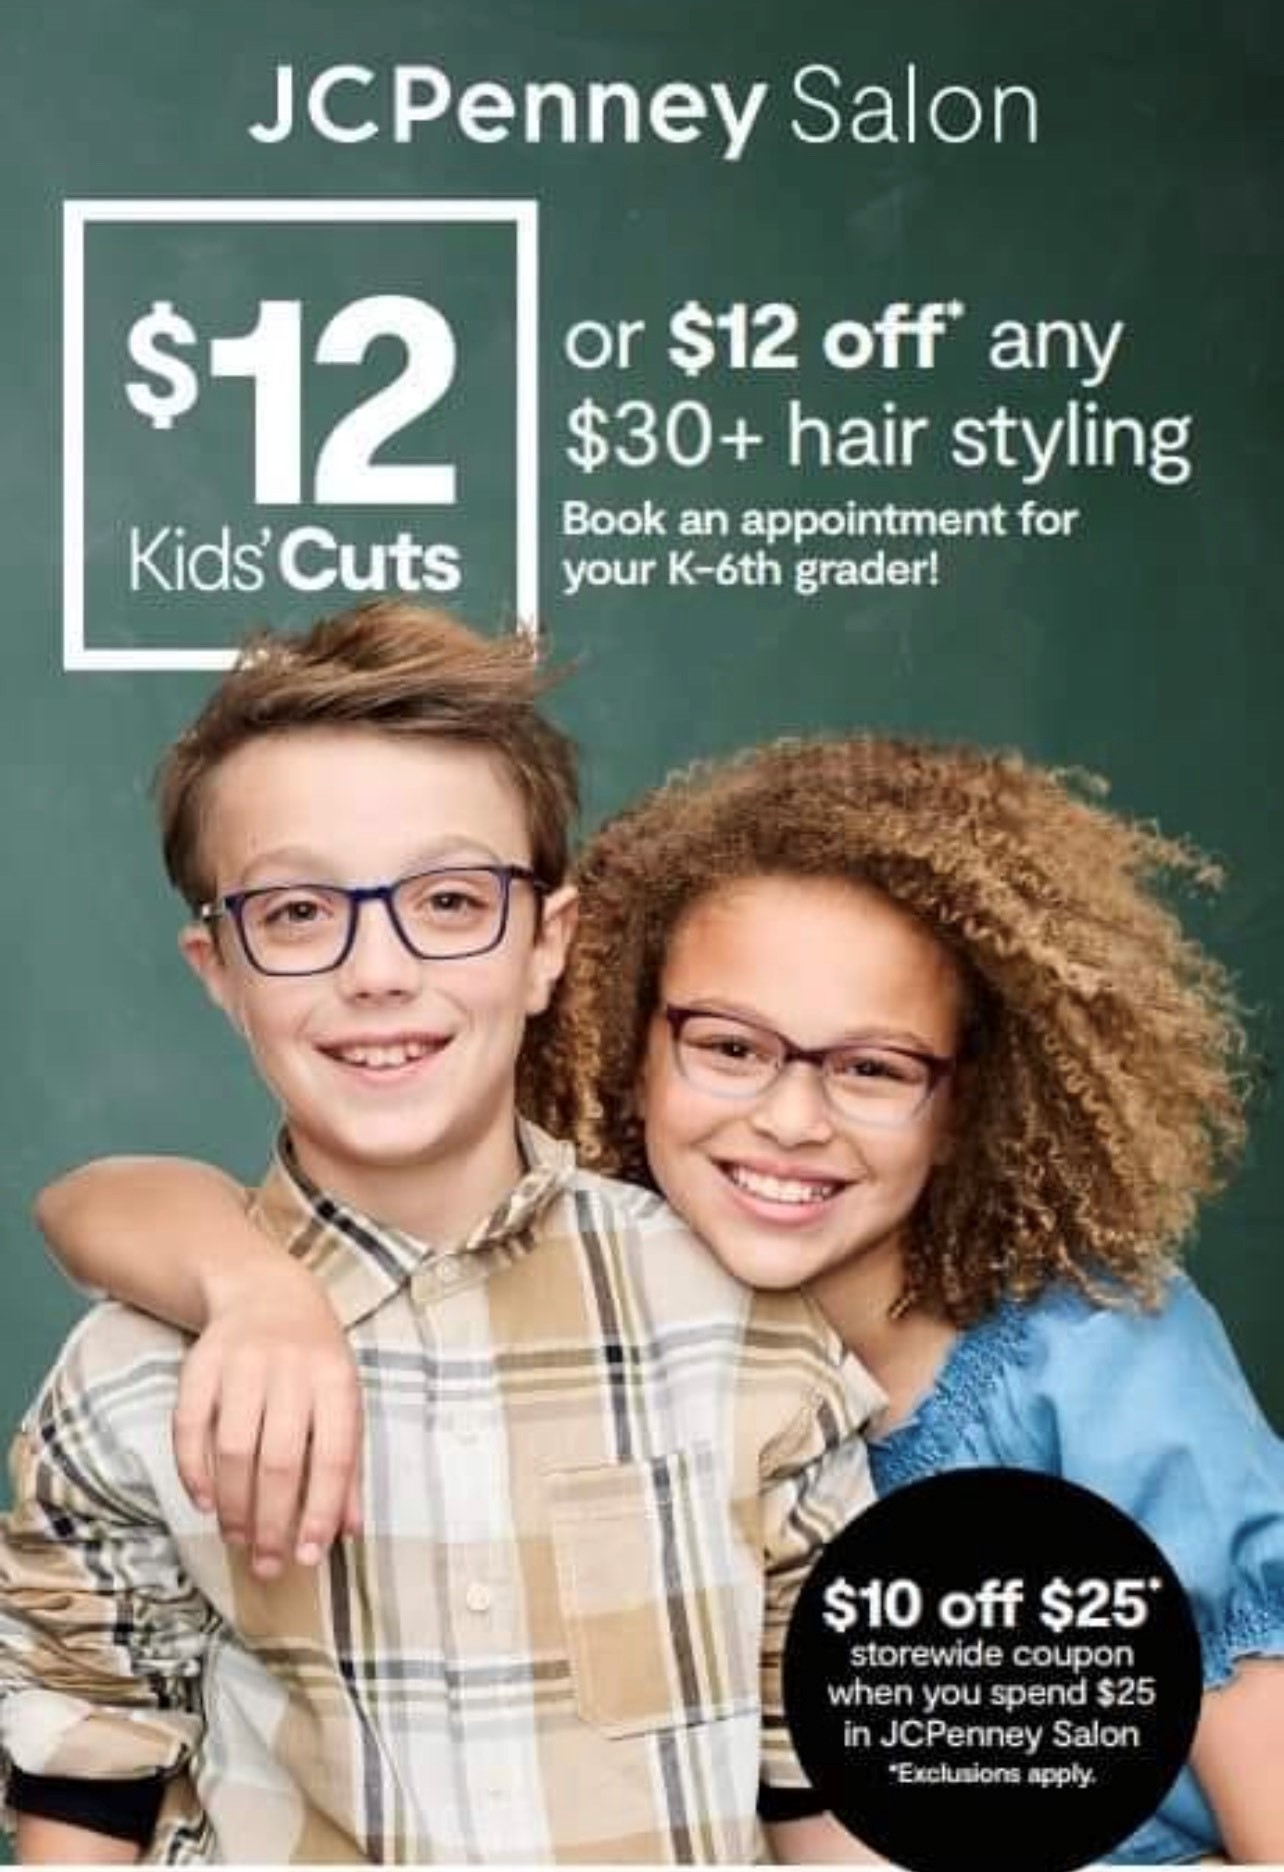 $12 Kids' Cuts or $12 off* any $30+ hair styling. Book an appointment for your K-6th grader!